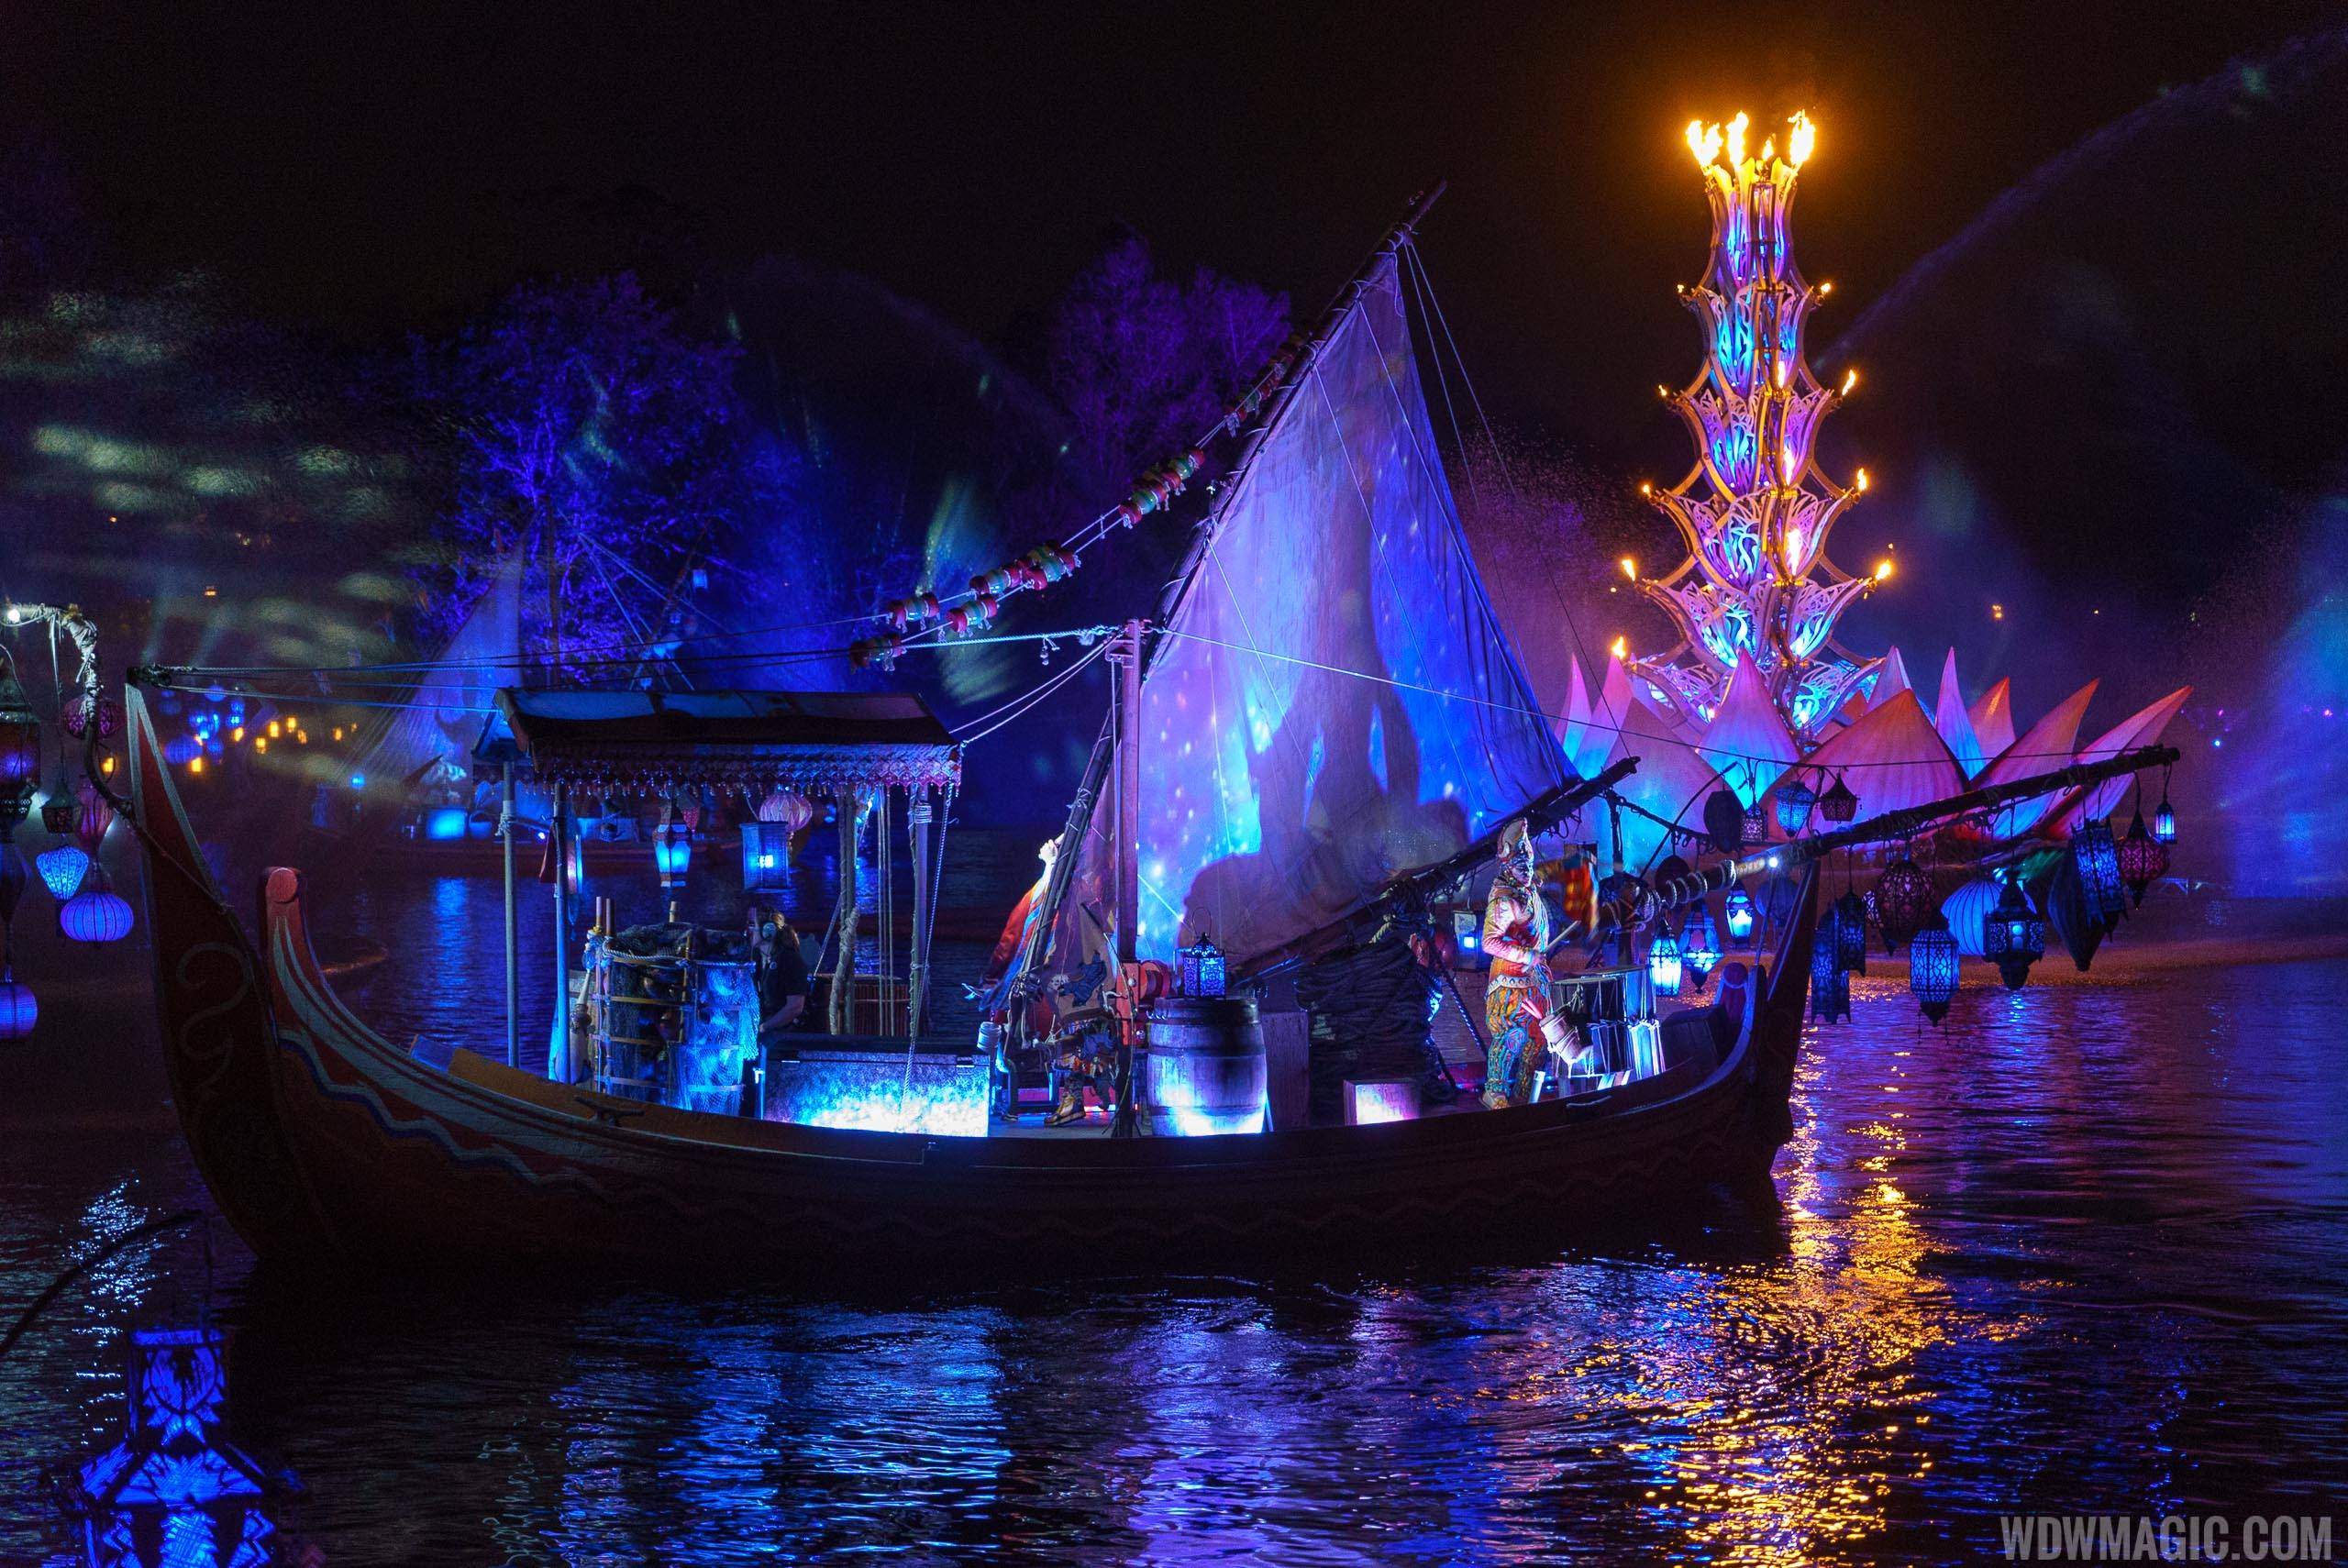 Rivers of Light is one of the new attractions at Walt Disney World